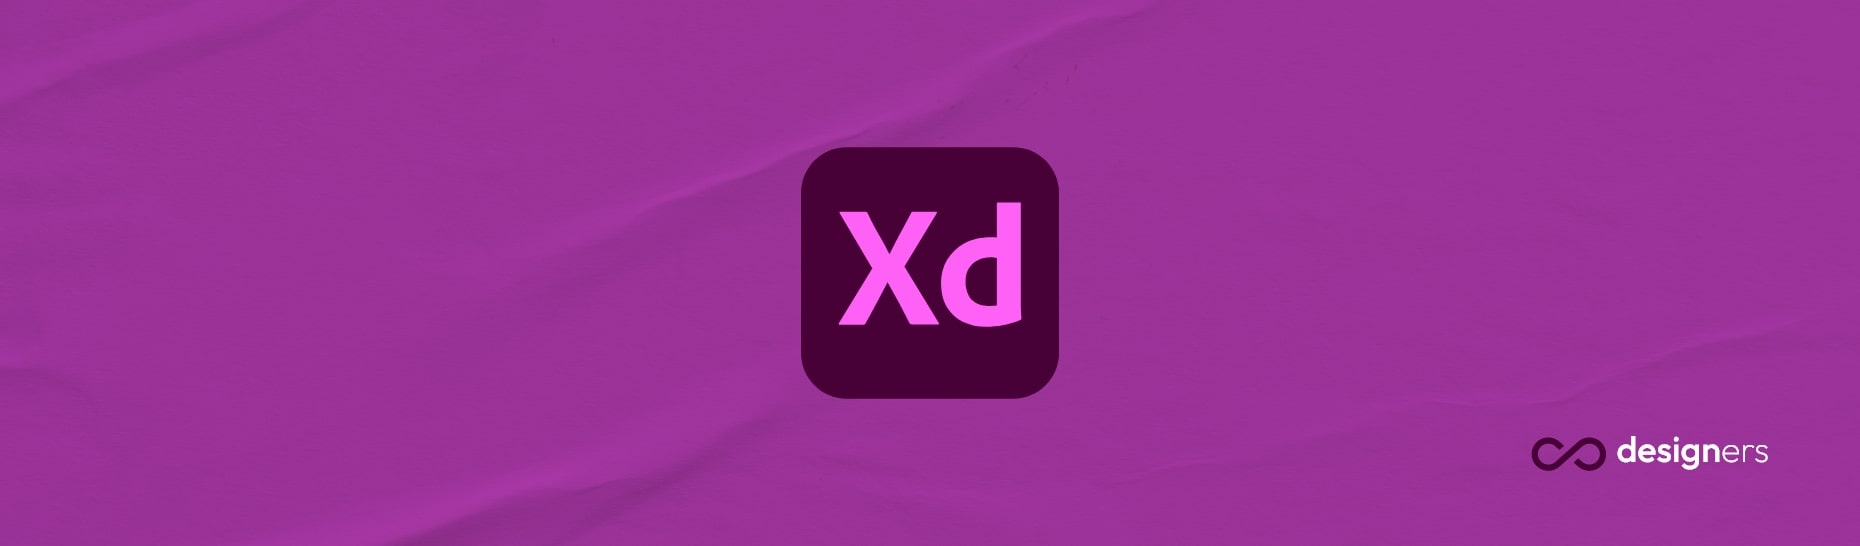 Figma vs Sketch vs Adobe XD Which One is Best Updated 2021